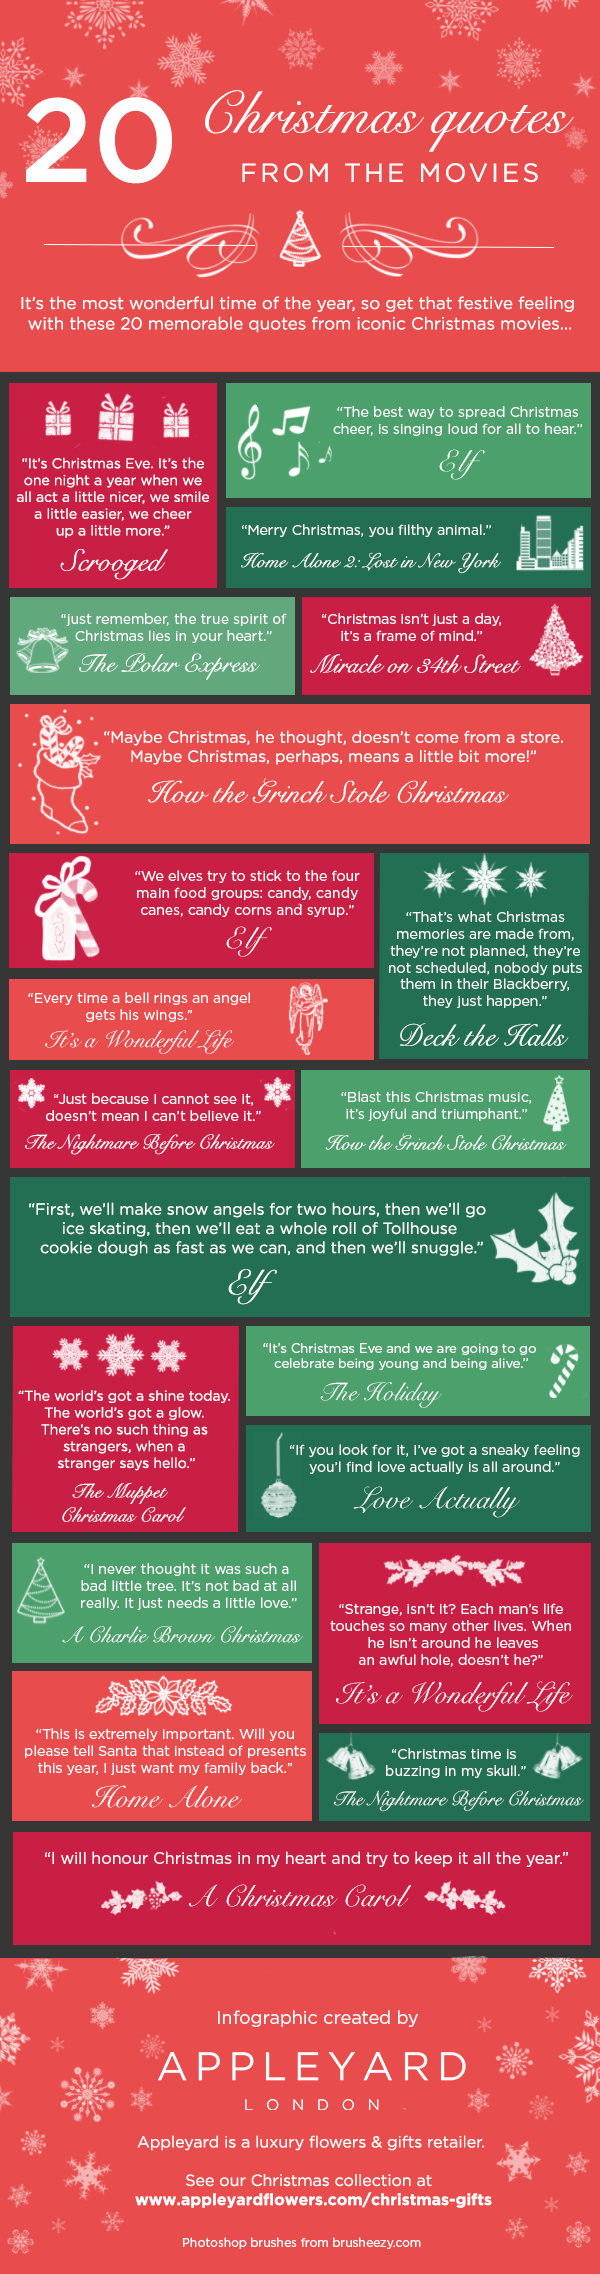 20 Memorable Christmas Quotes From The Movies Infographic Appleyard London 20 memorable christmas quotes from the